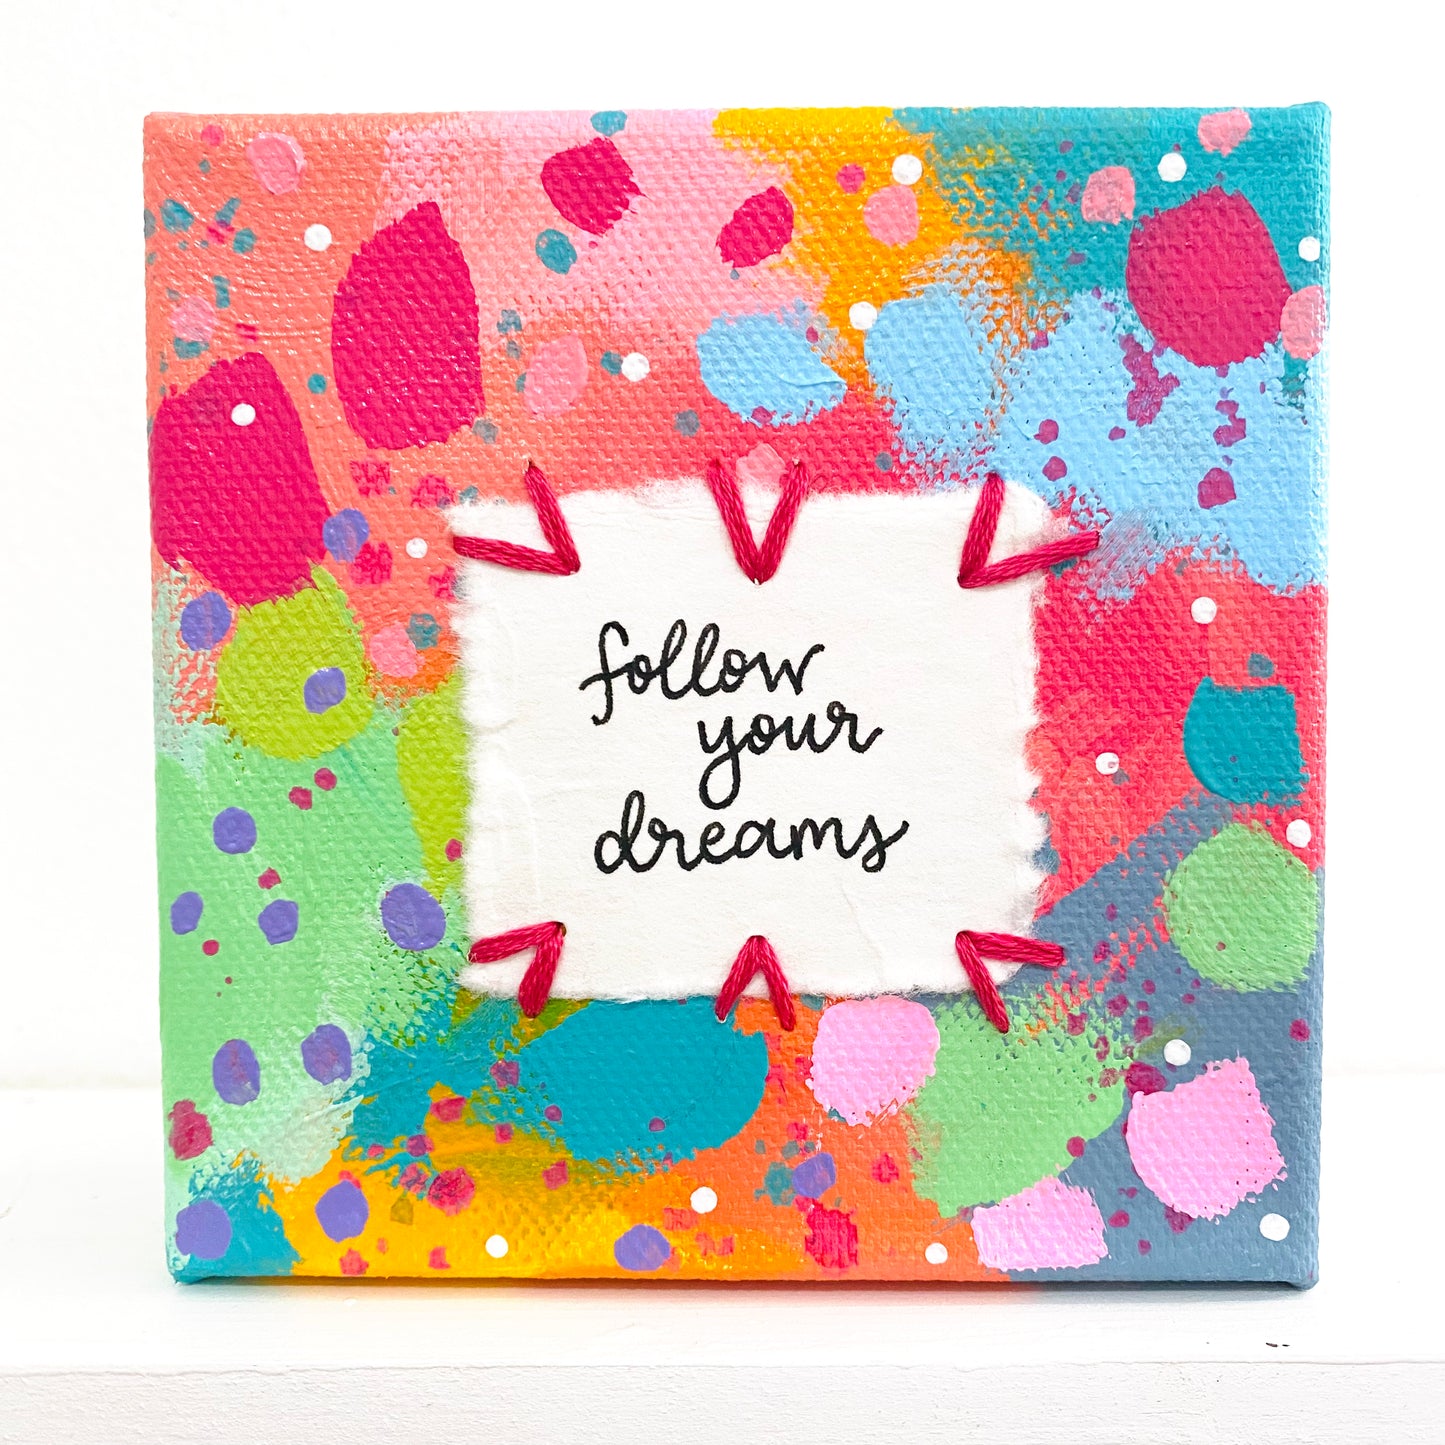 Follow Your Dreams 4x4 inch original abstract canvas with embroidery thread accents